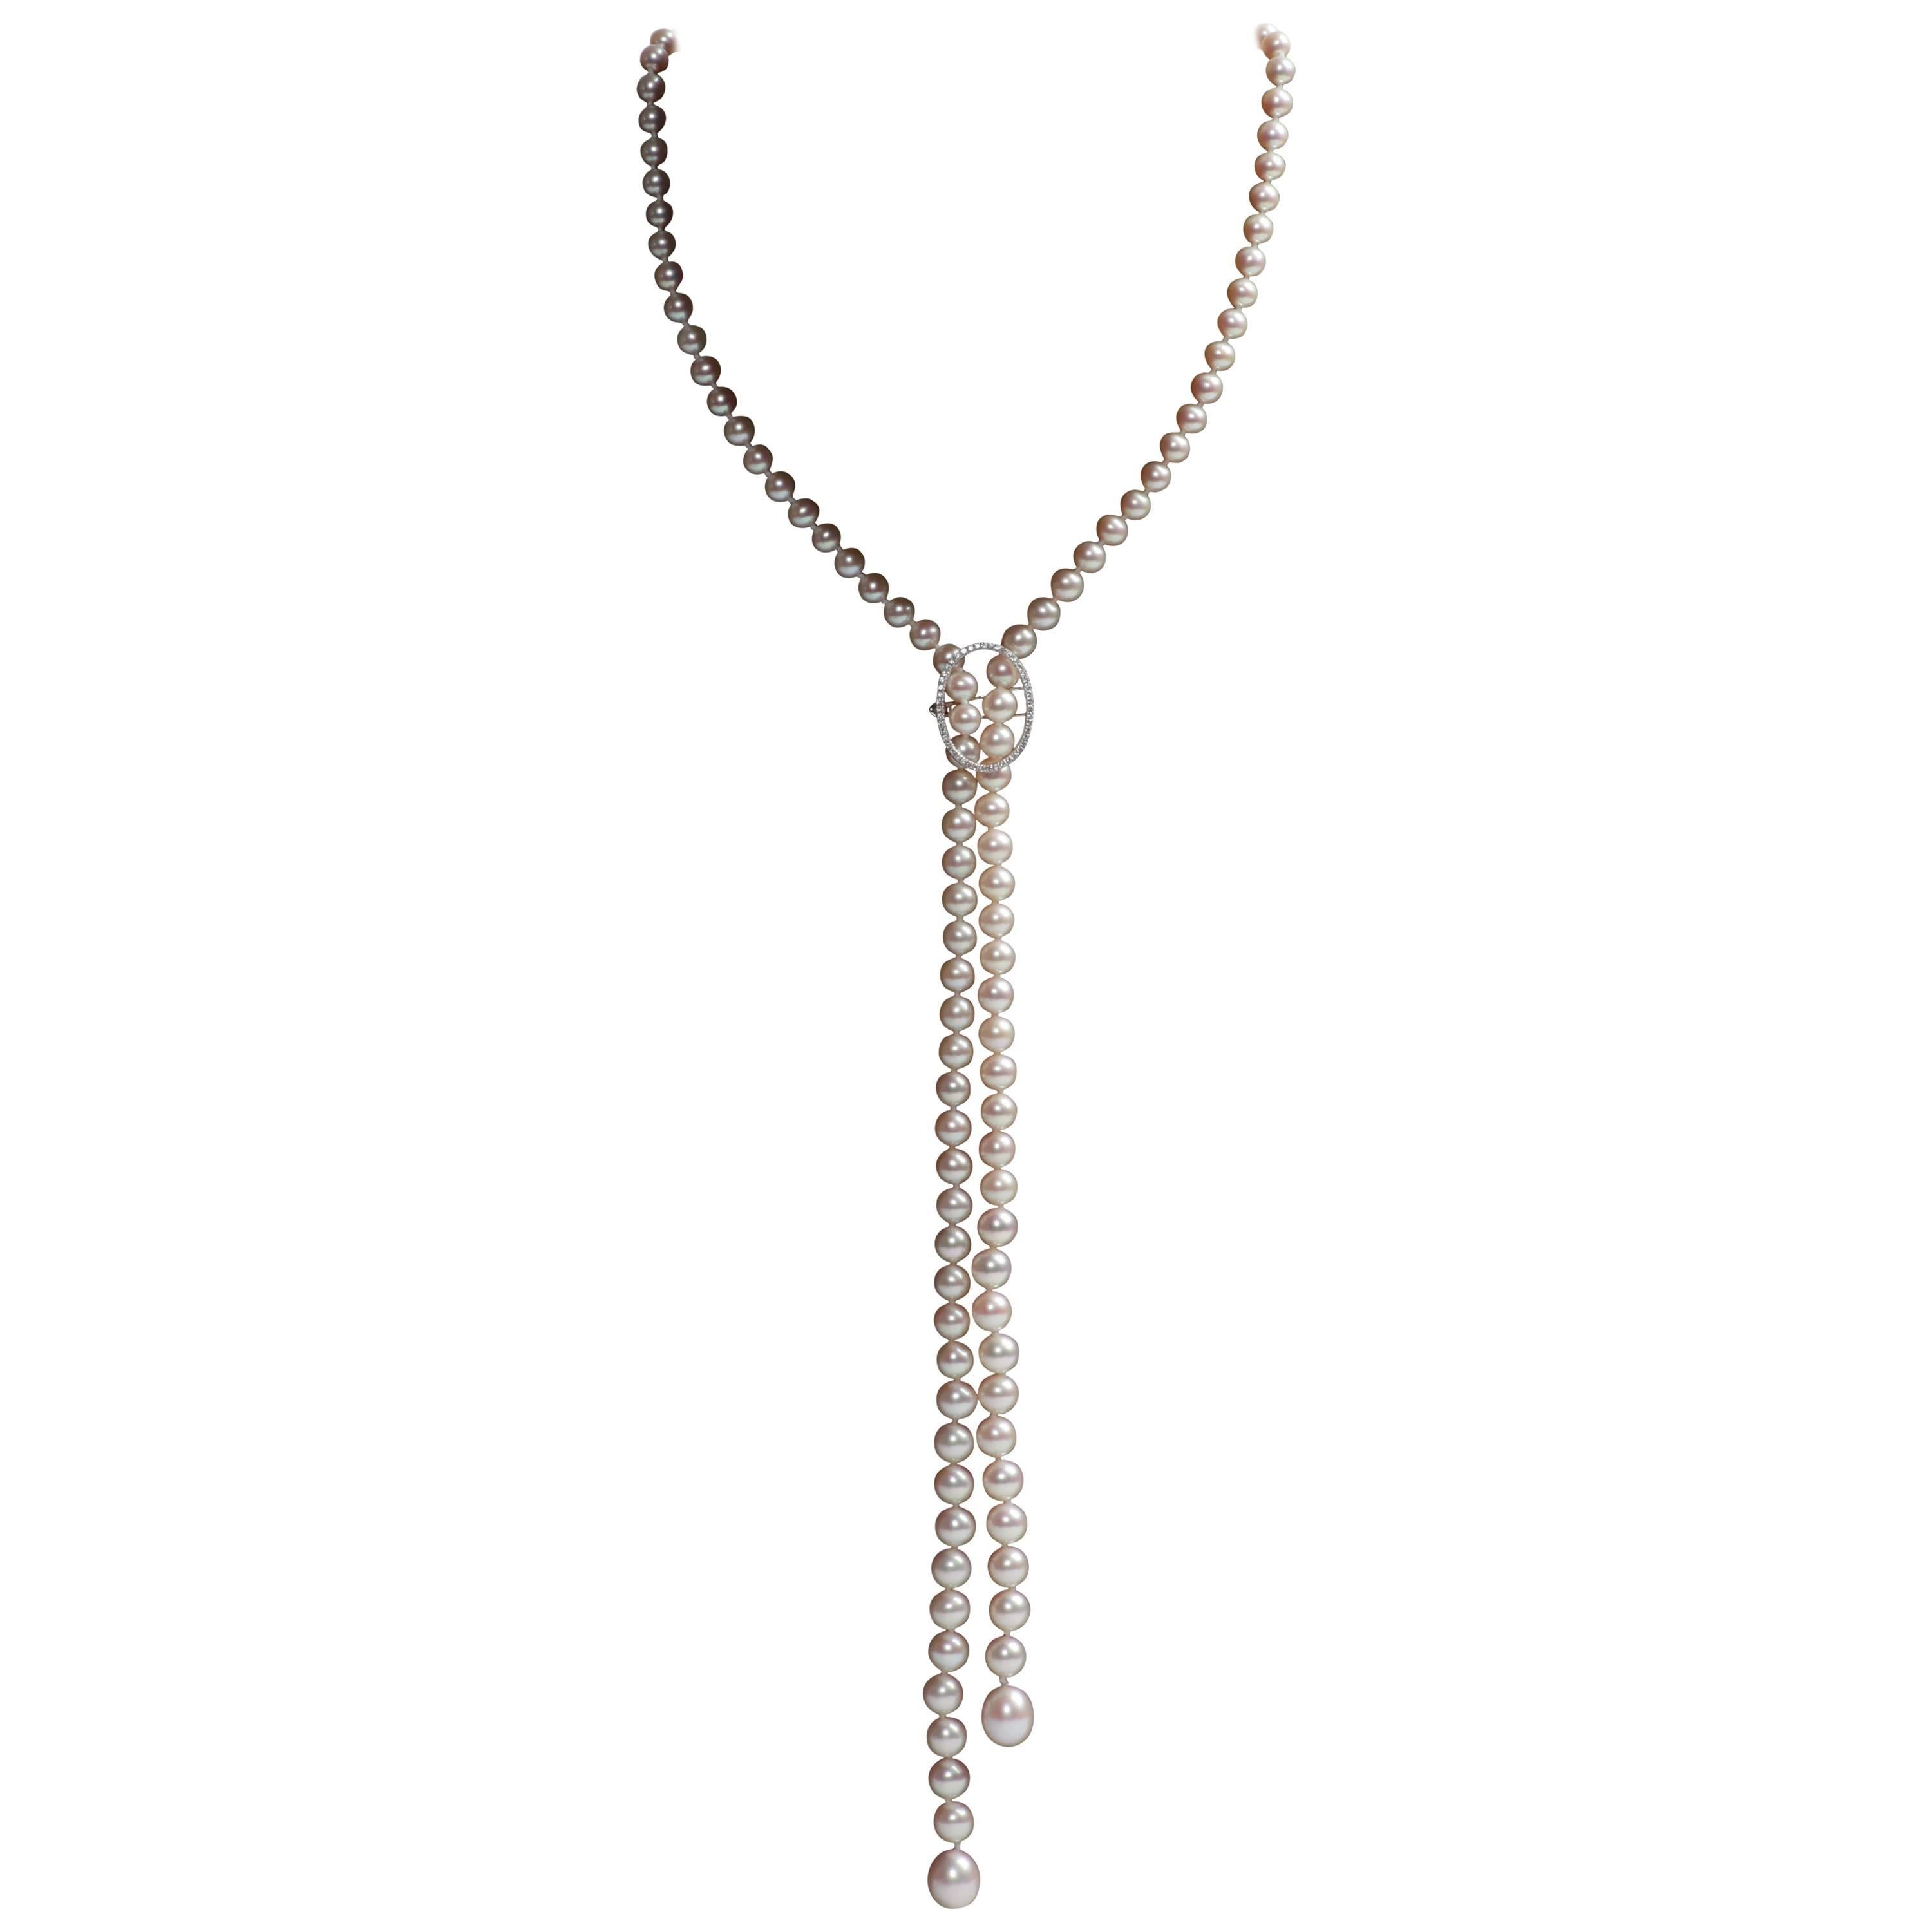 Marion Jeantet Elegant Long Necklace of White Pearls and Diamonds 